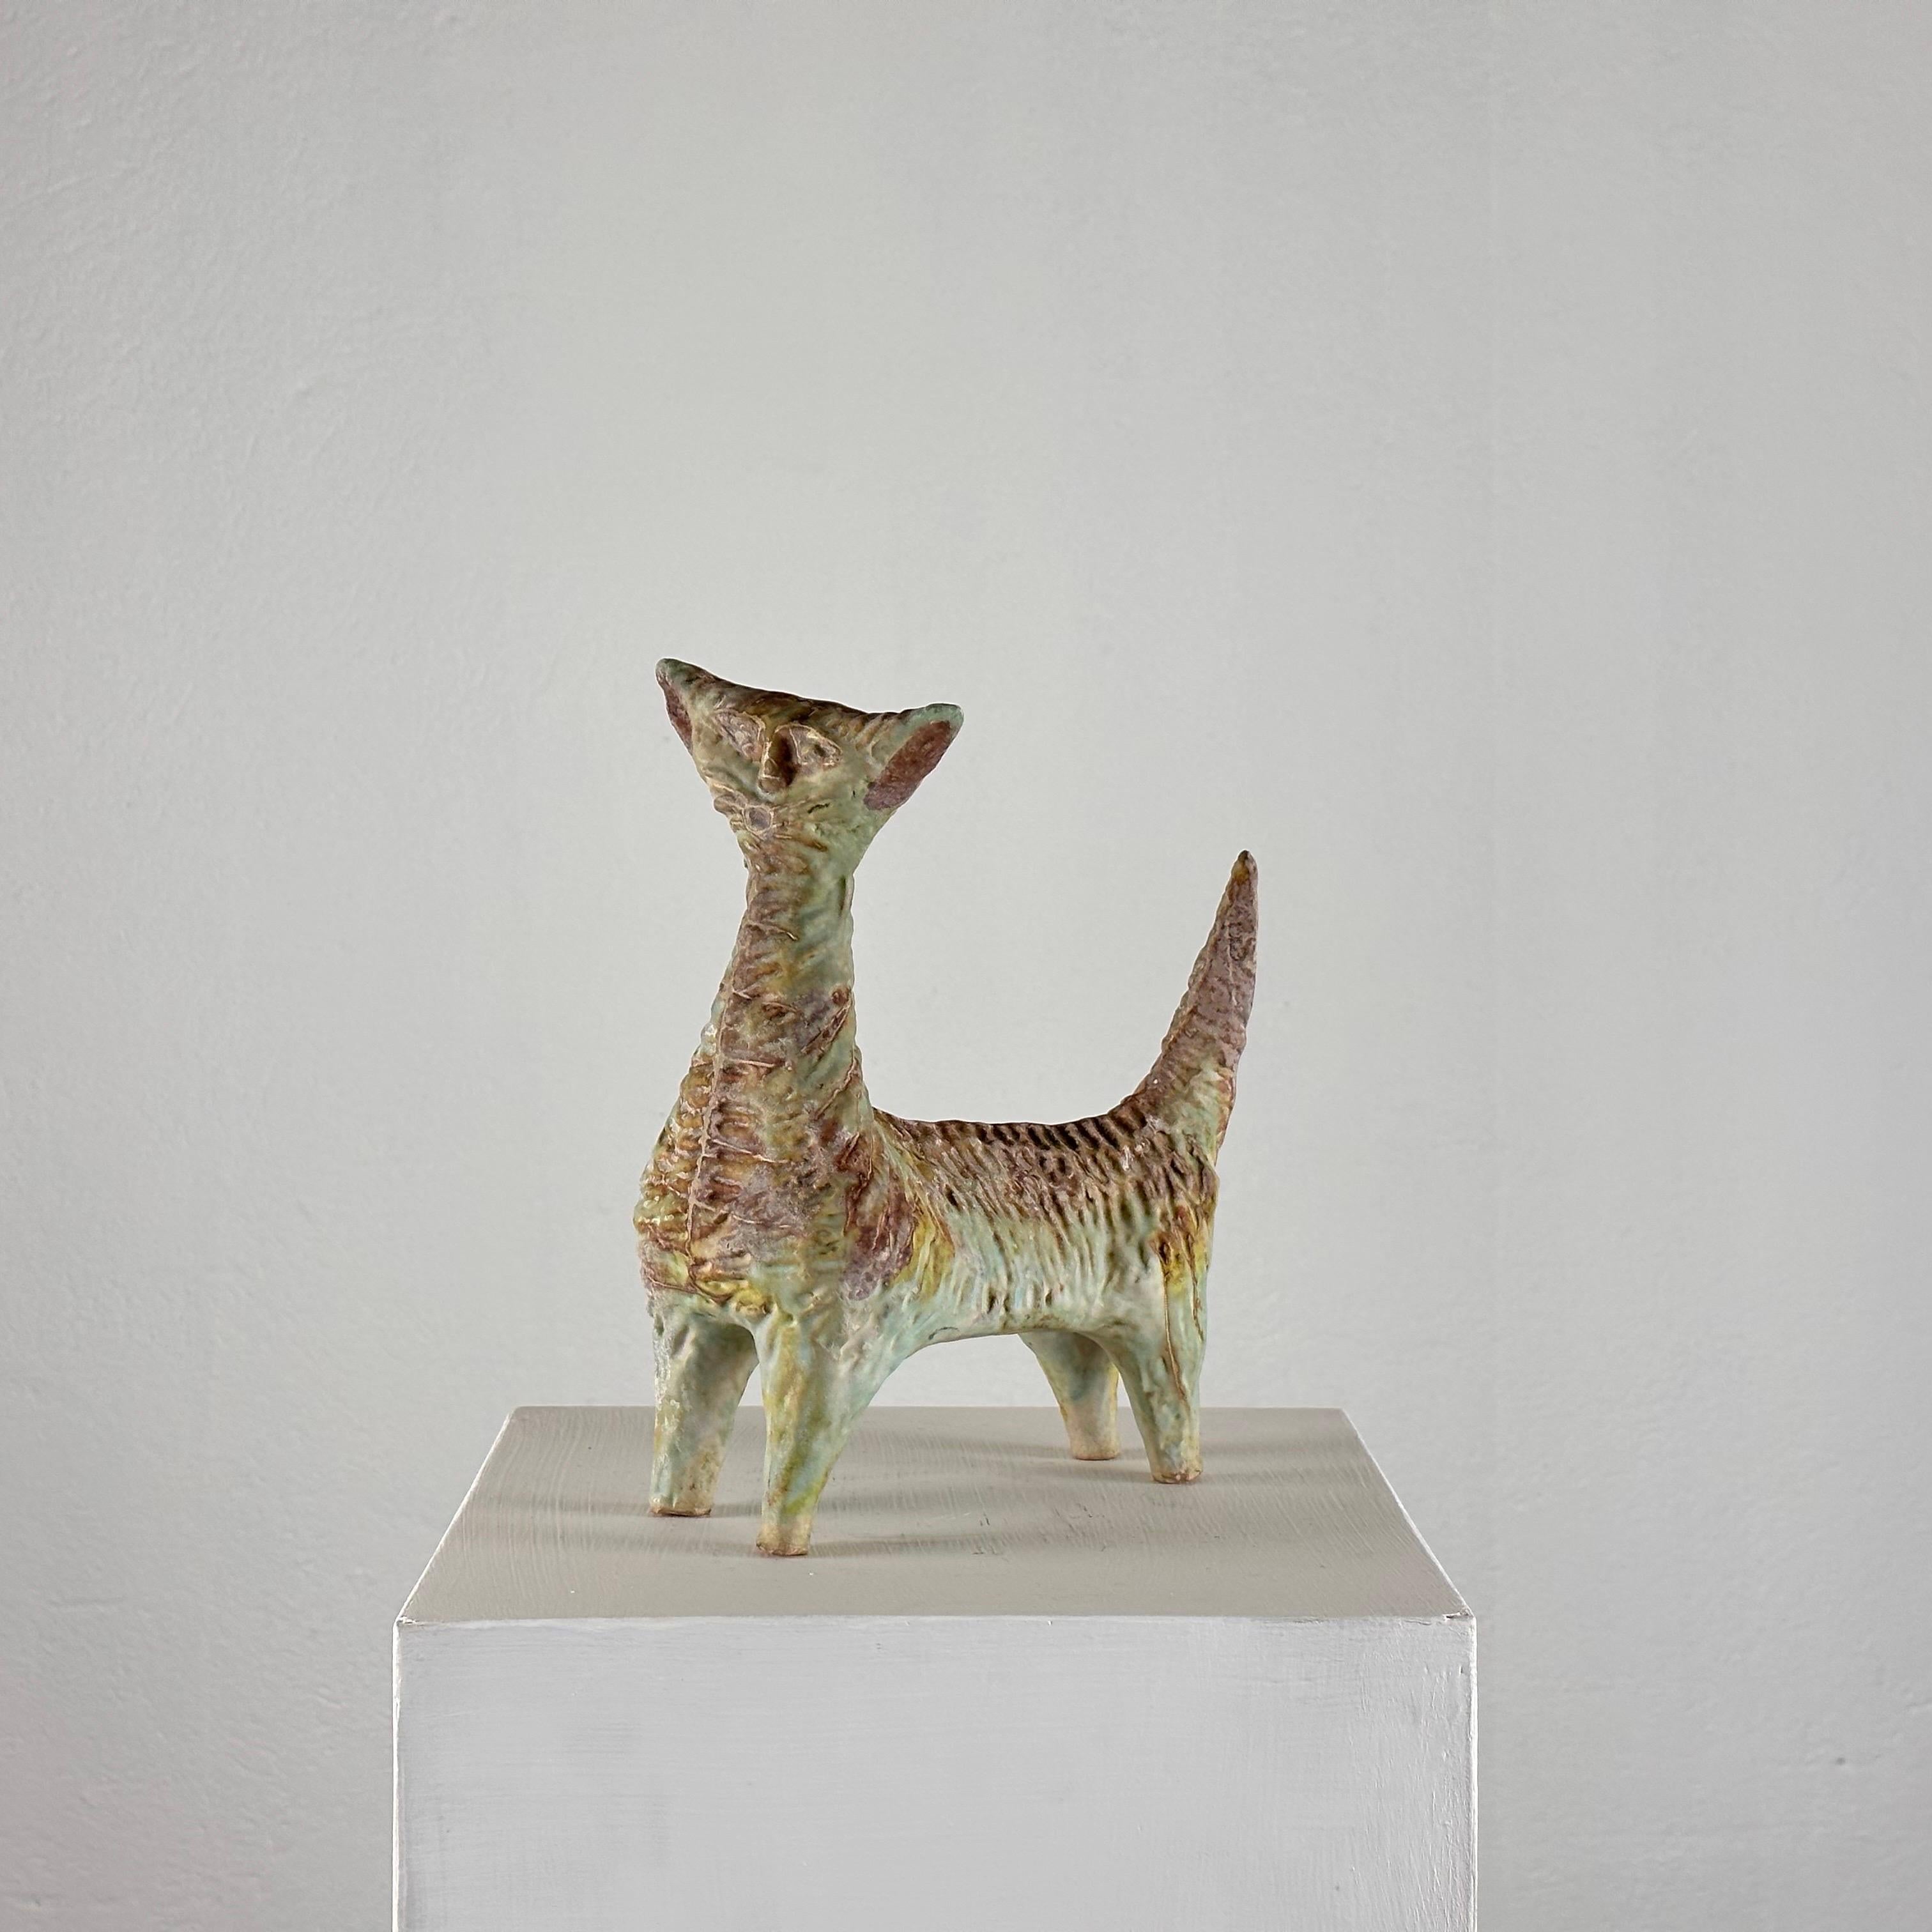 
Capture the essence of mid-century Italian craftsmanship with this extraordinary ceramic cat created by Giovan Battista Mitri in the 1950s. Renowned for his mastery of form and color, Mitri's work continues to captivate collectors and enthusiasts